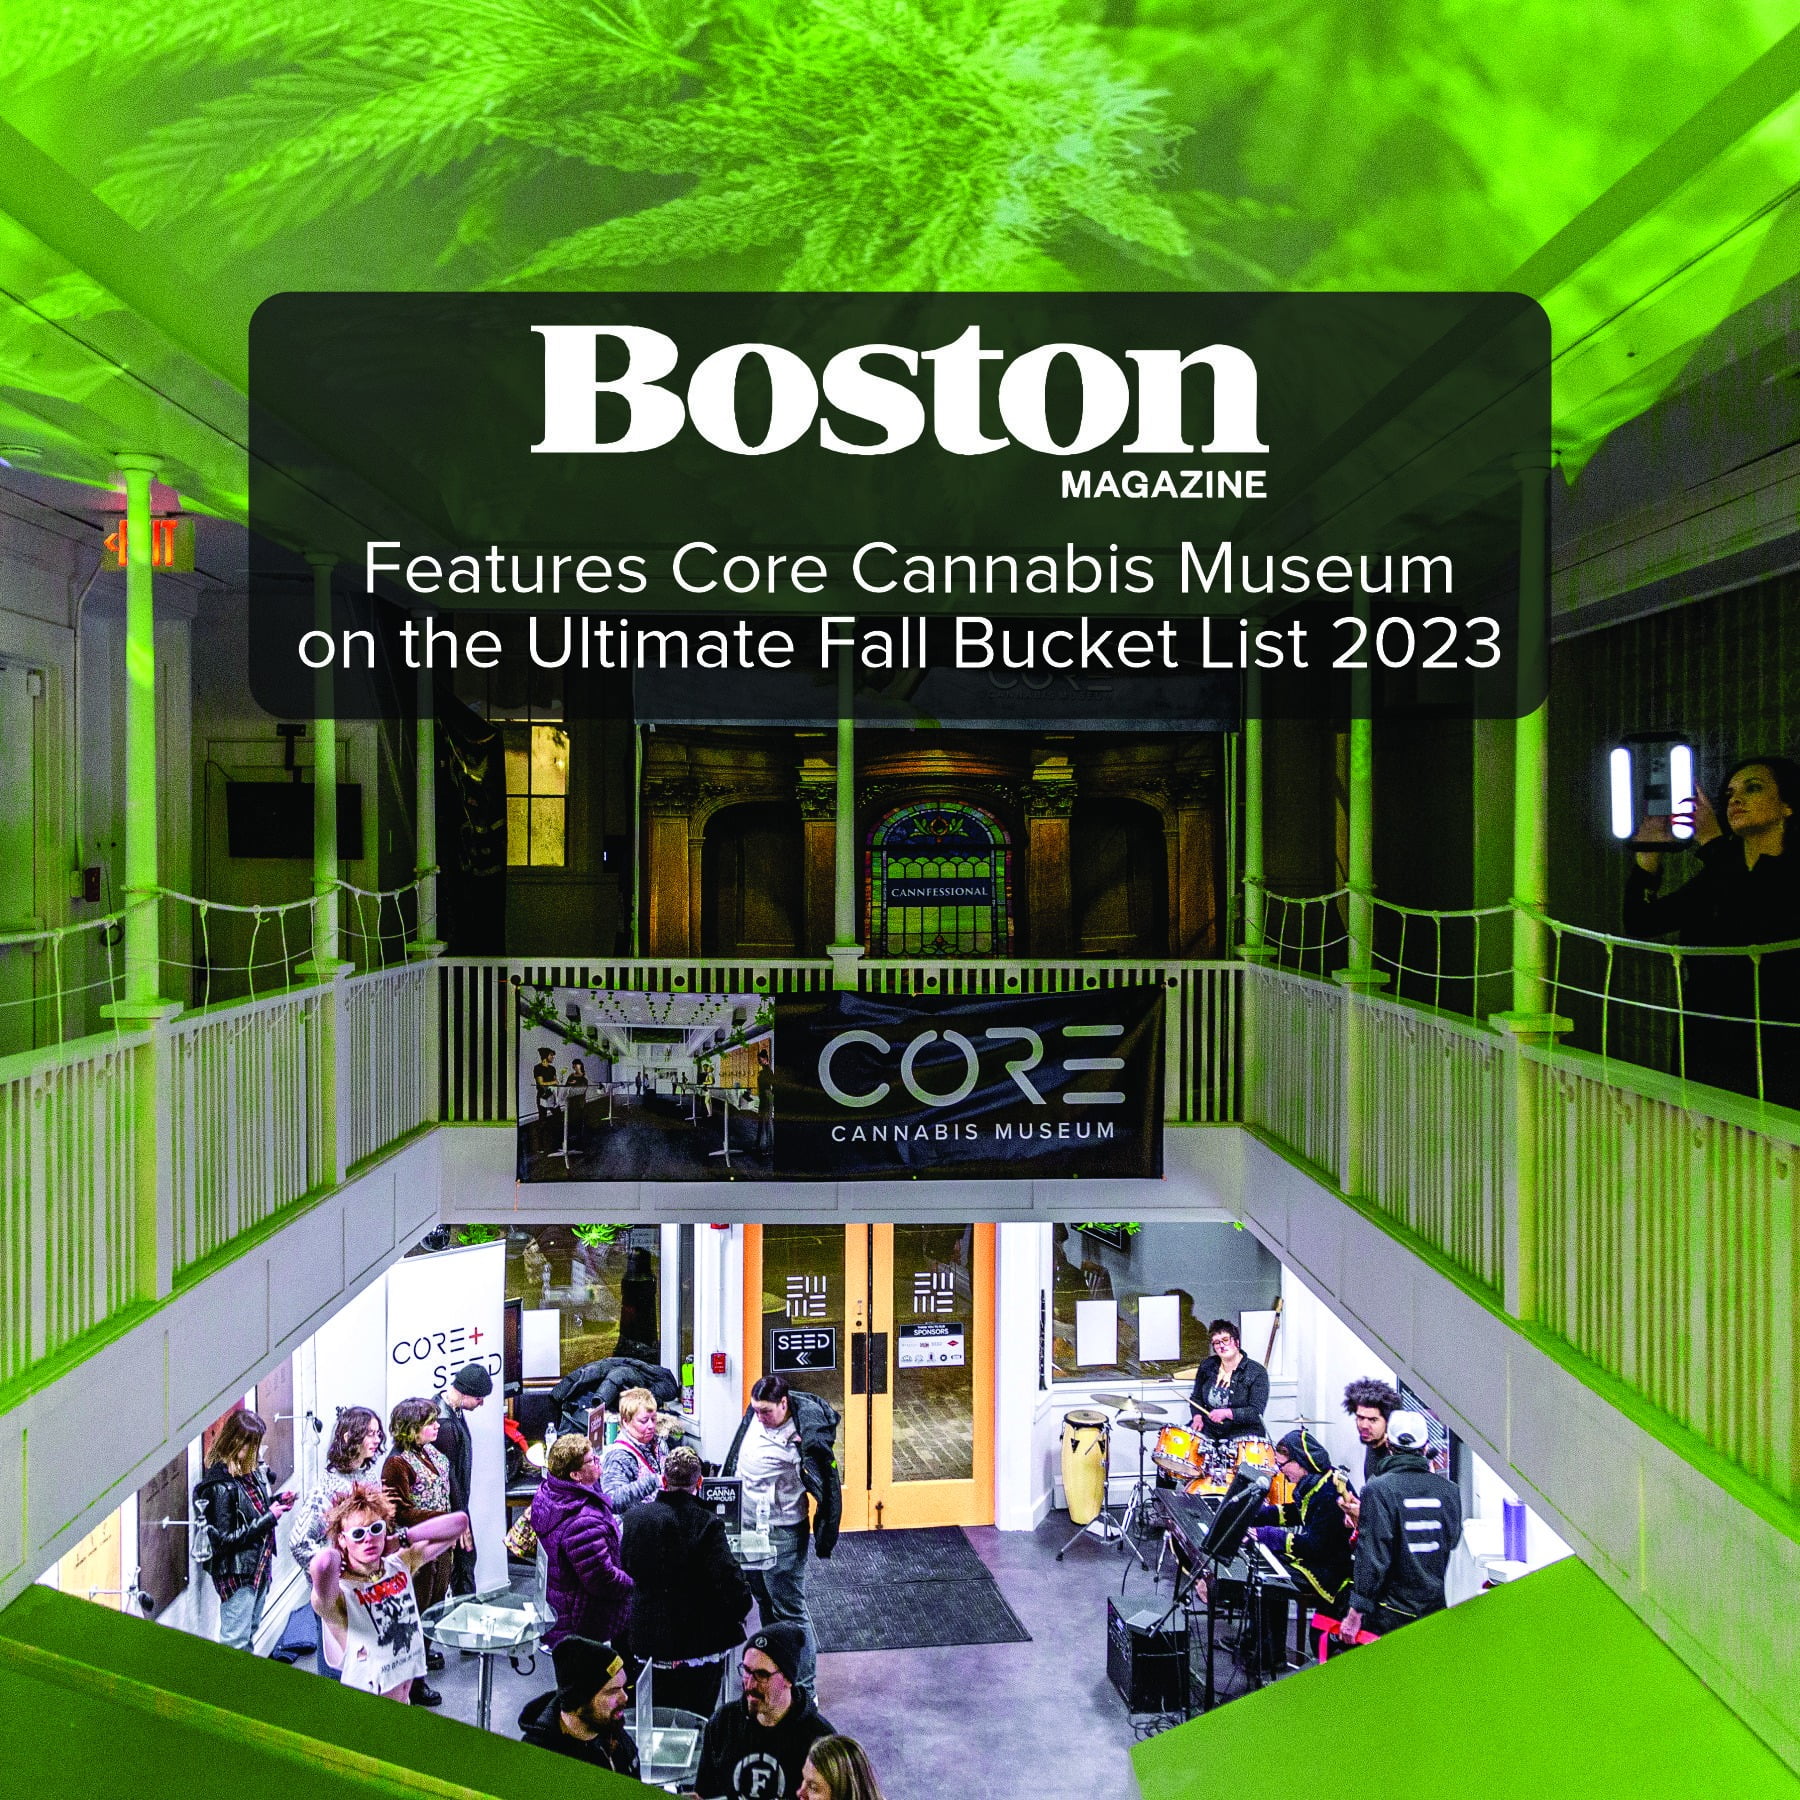 Ready to check off your fall bucket list?@bostonmagazine has featured the @corecannabismuseum on the Ultimate Fall New England Bucket List for 2023!Plan your fall roadtrip to include our current exhibitions in Portland, ME ( #seedtosoul) and Boston, MA ( #americanwarden). We can’t wait to see you!